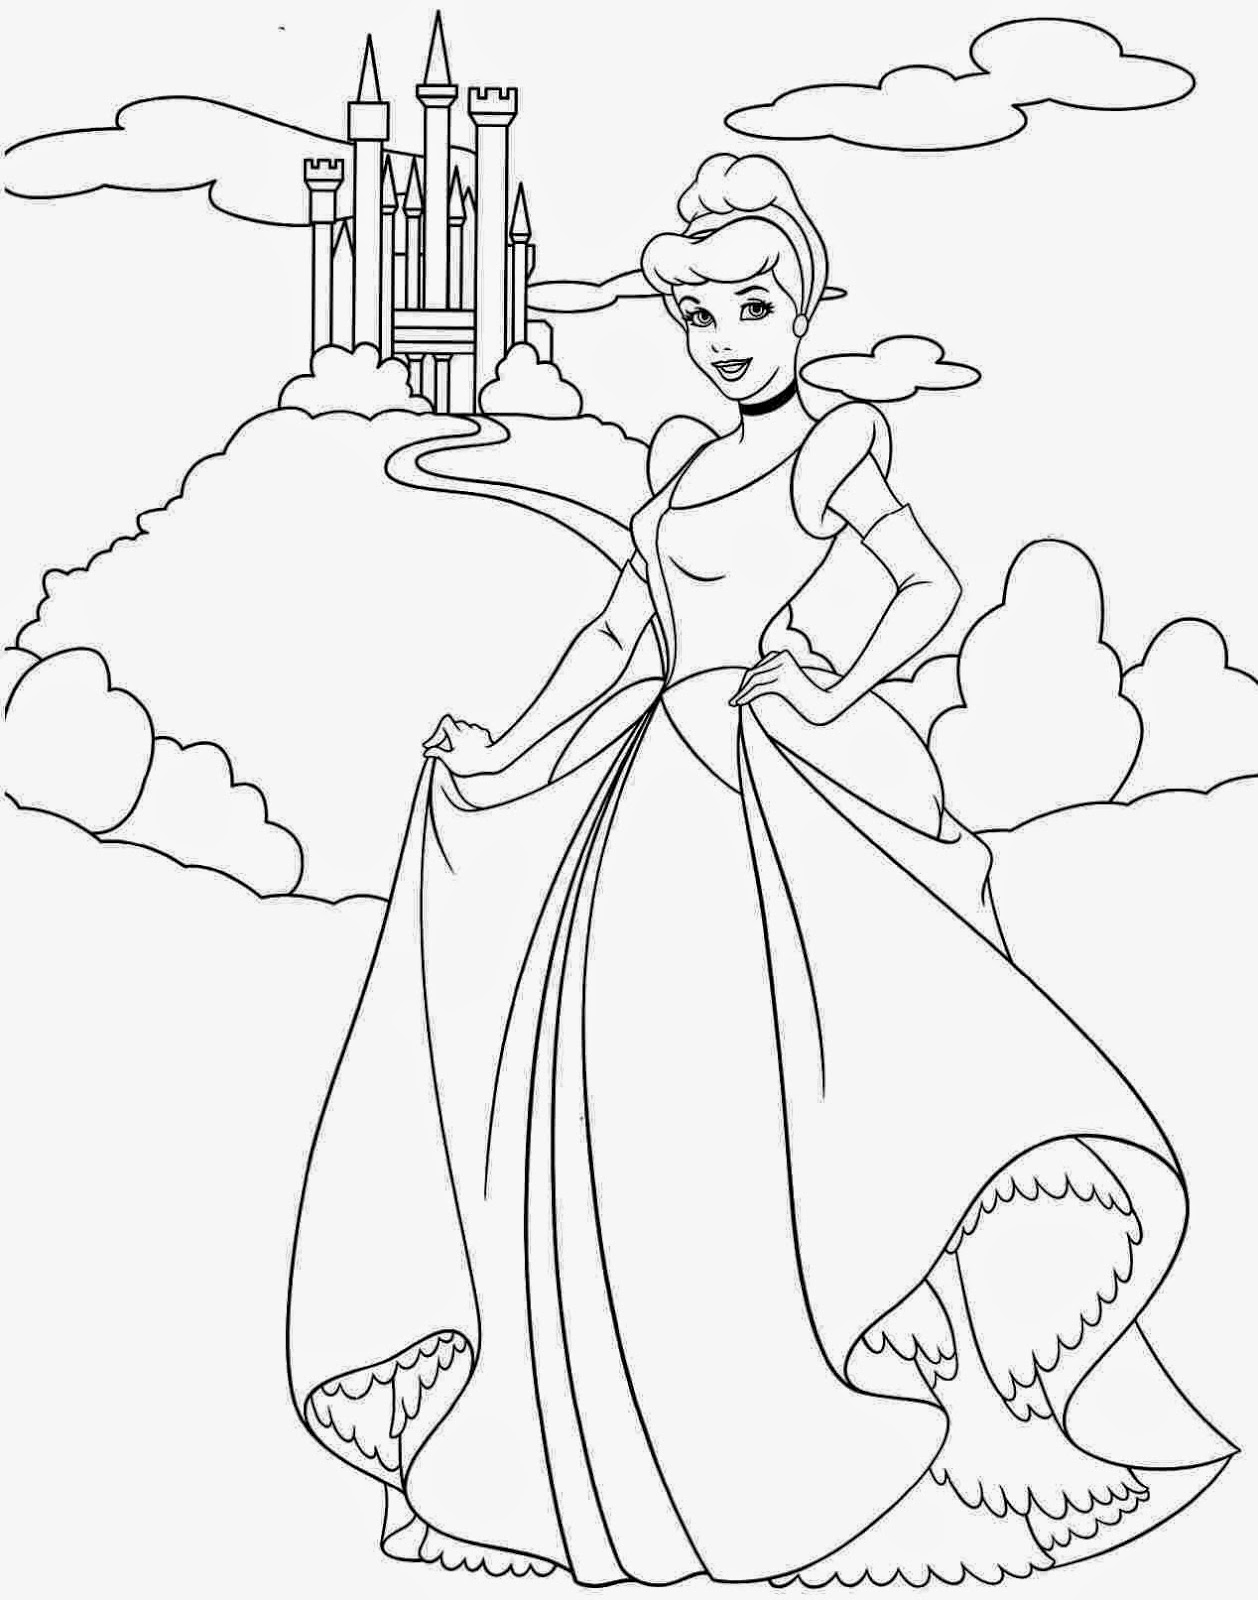 Download Coloring Pages: Cinderella Free Printable Coloring Pages